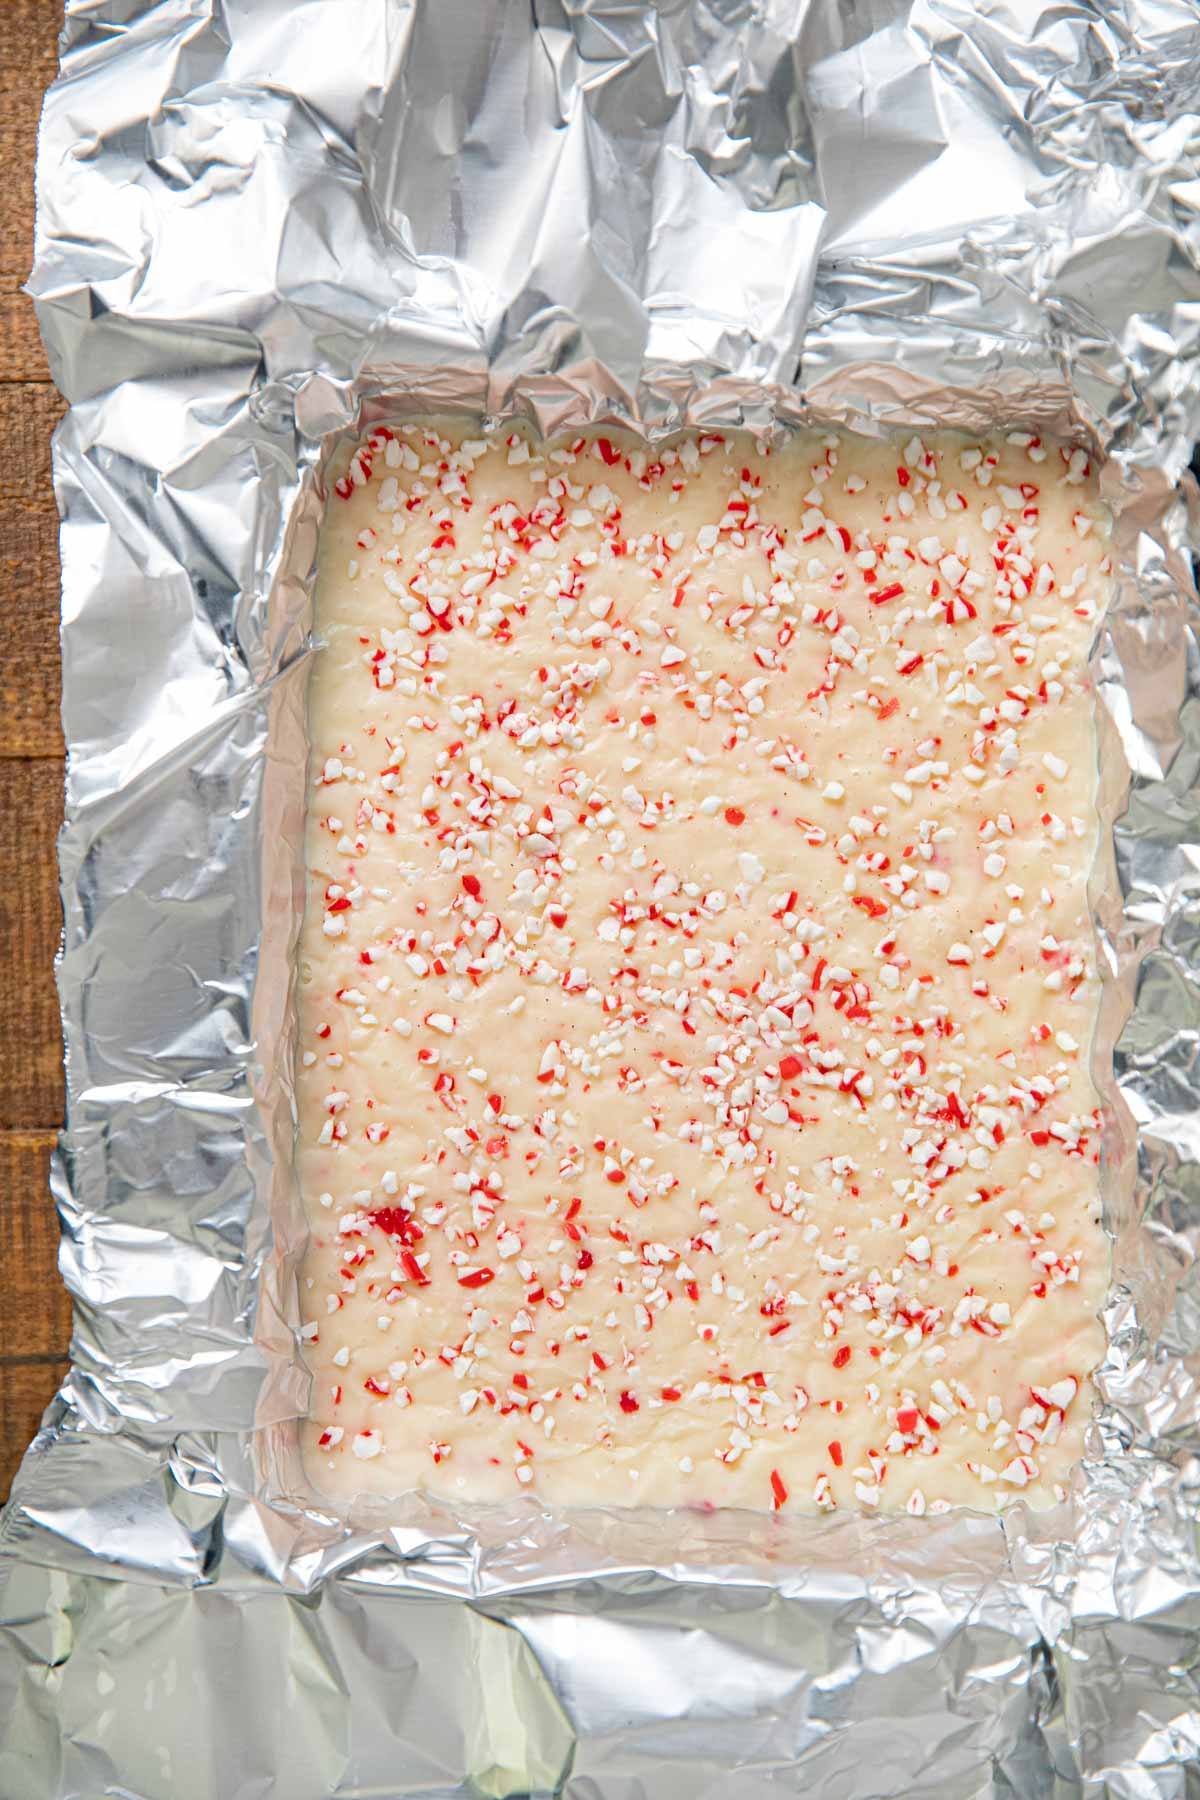 White Chocolate Peppermint Fudge in foil-lined baking dish